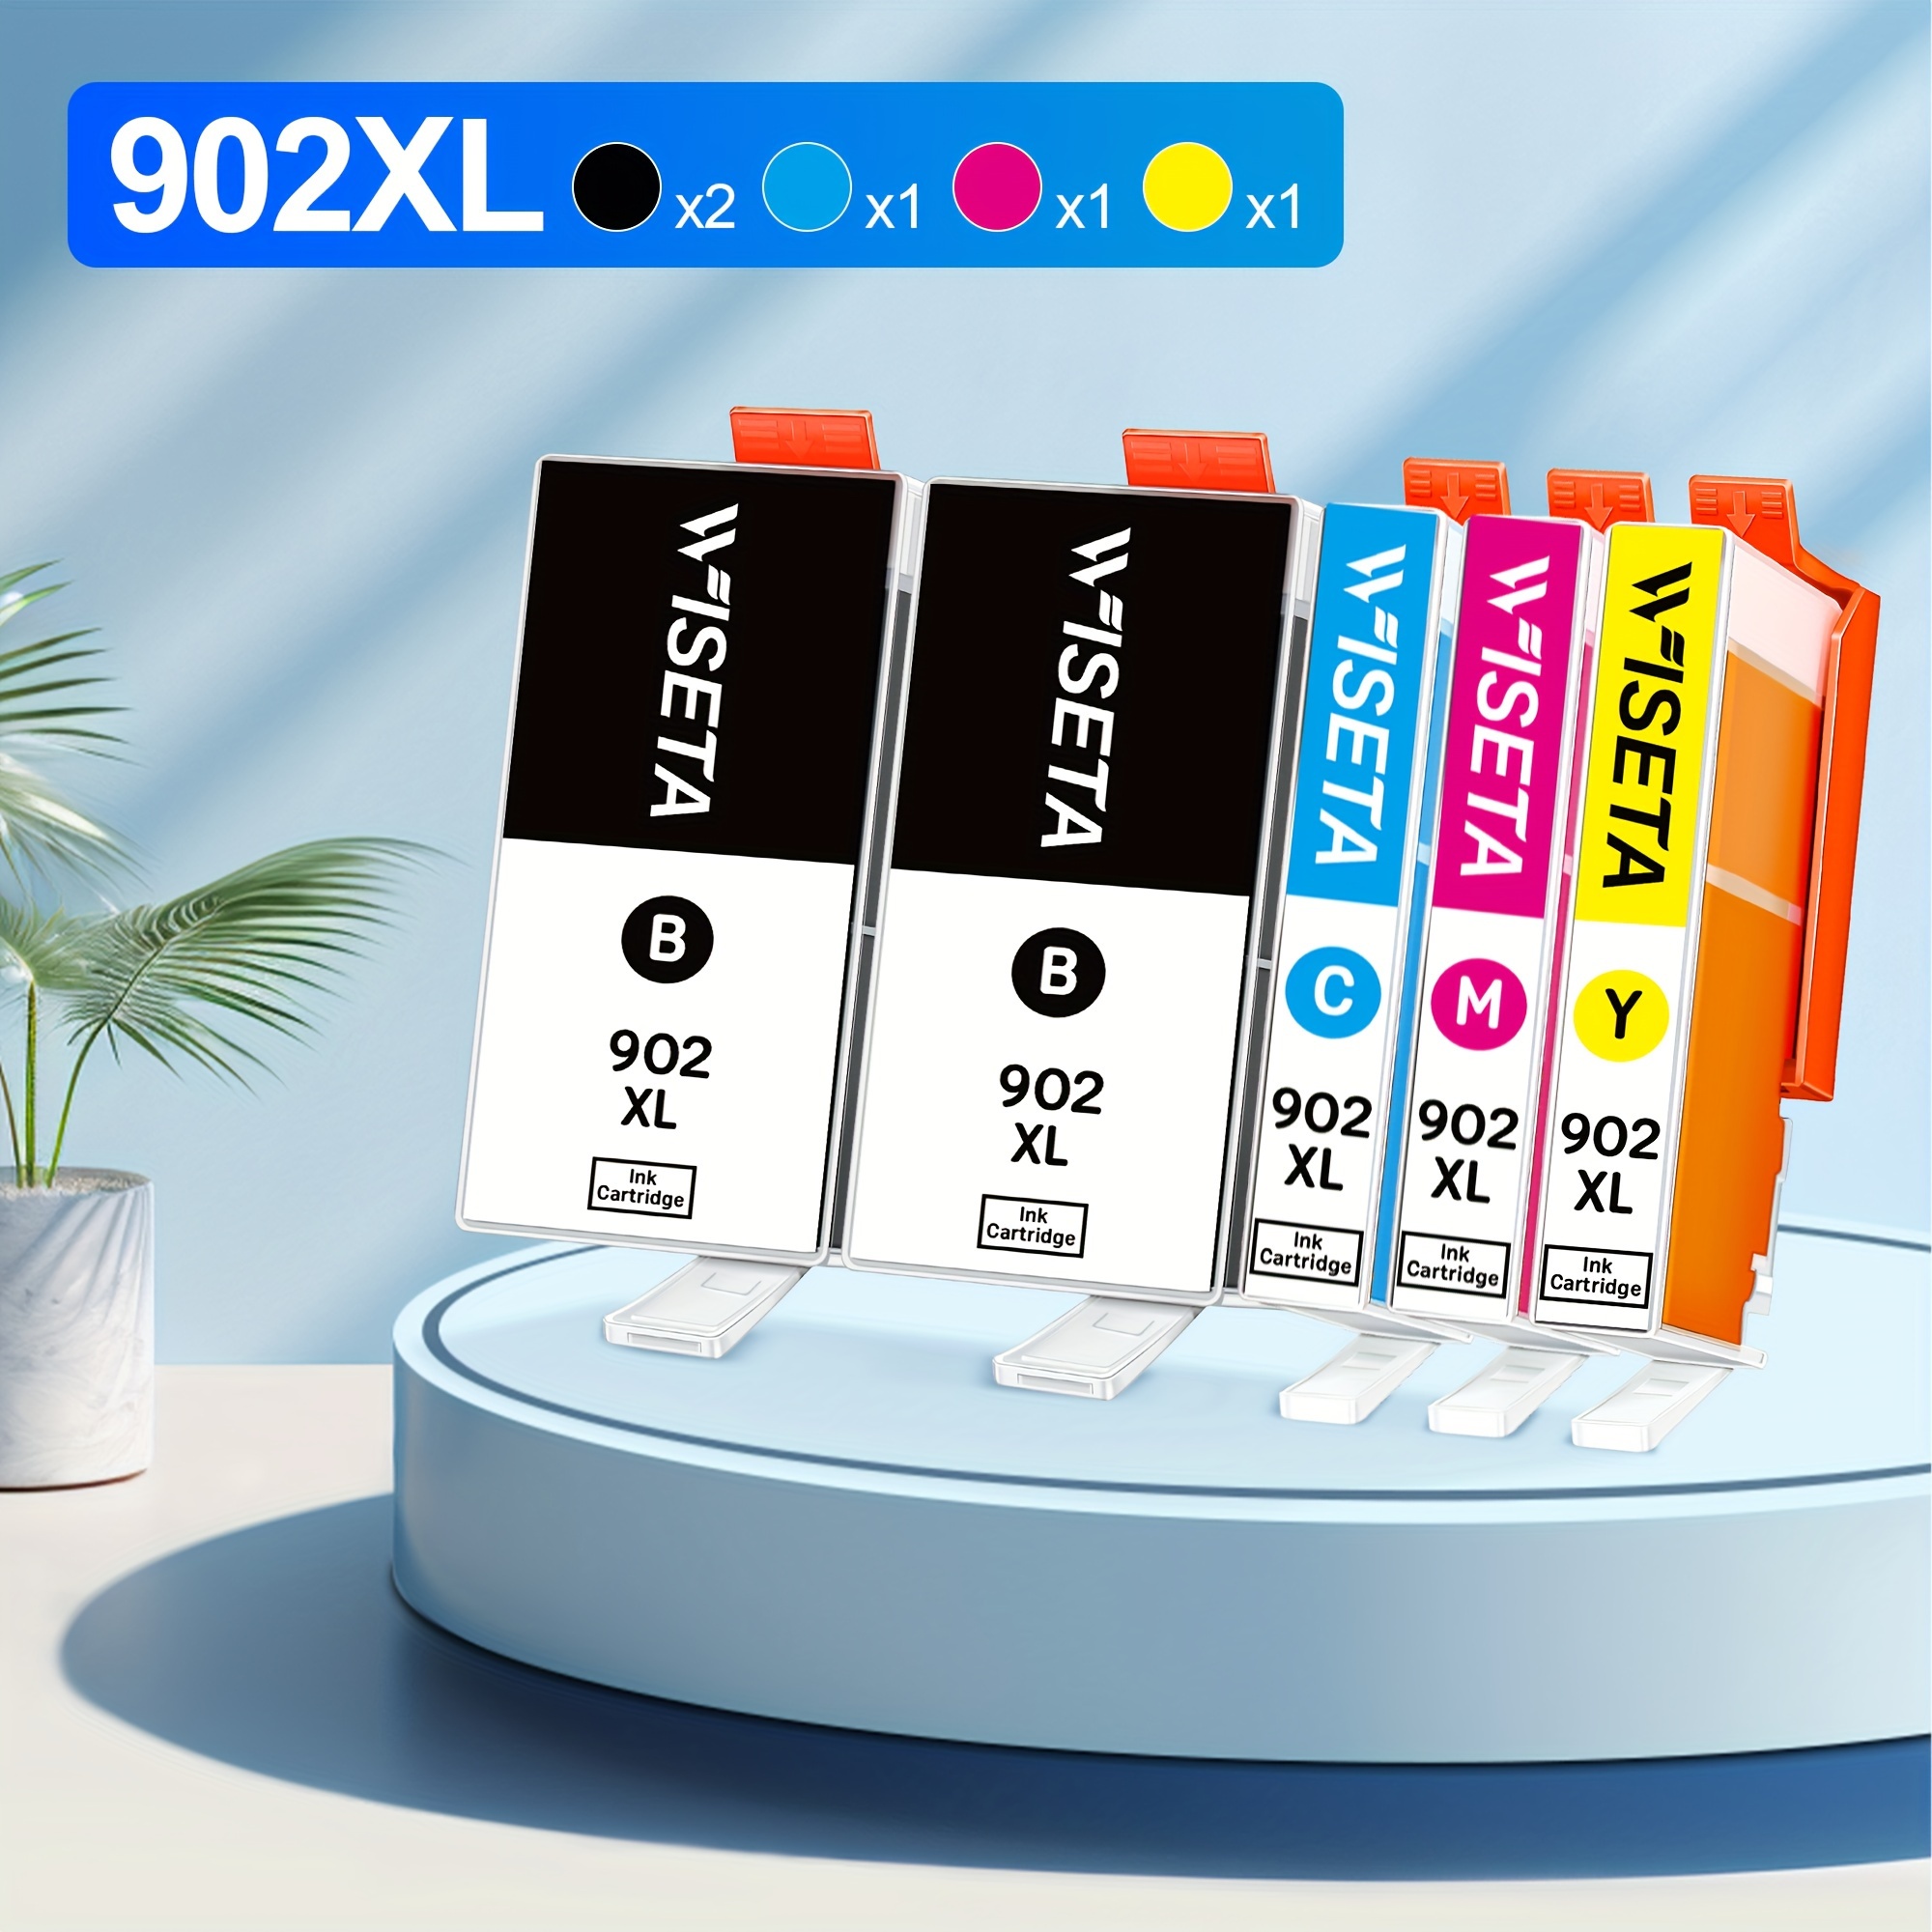 

5 Pack 902xl Ink Cartridges Combo Pack Compatible For 902xl 902 Ink Cartridges 902xl Ink Cartridges For Printers For Officejet Pro 6958 6978 6968 6970 6960 6962, 5 Packs Of 902 902xl Ink